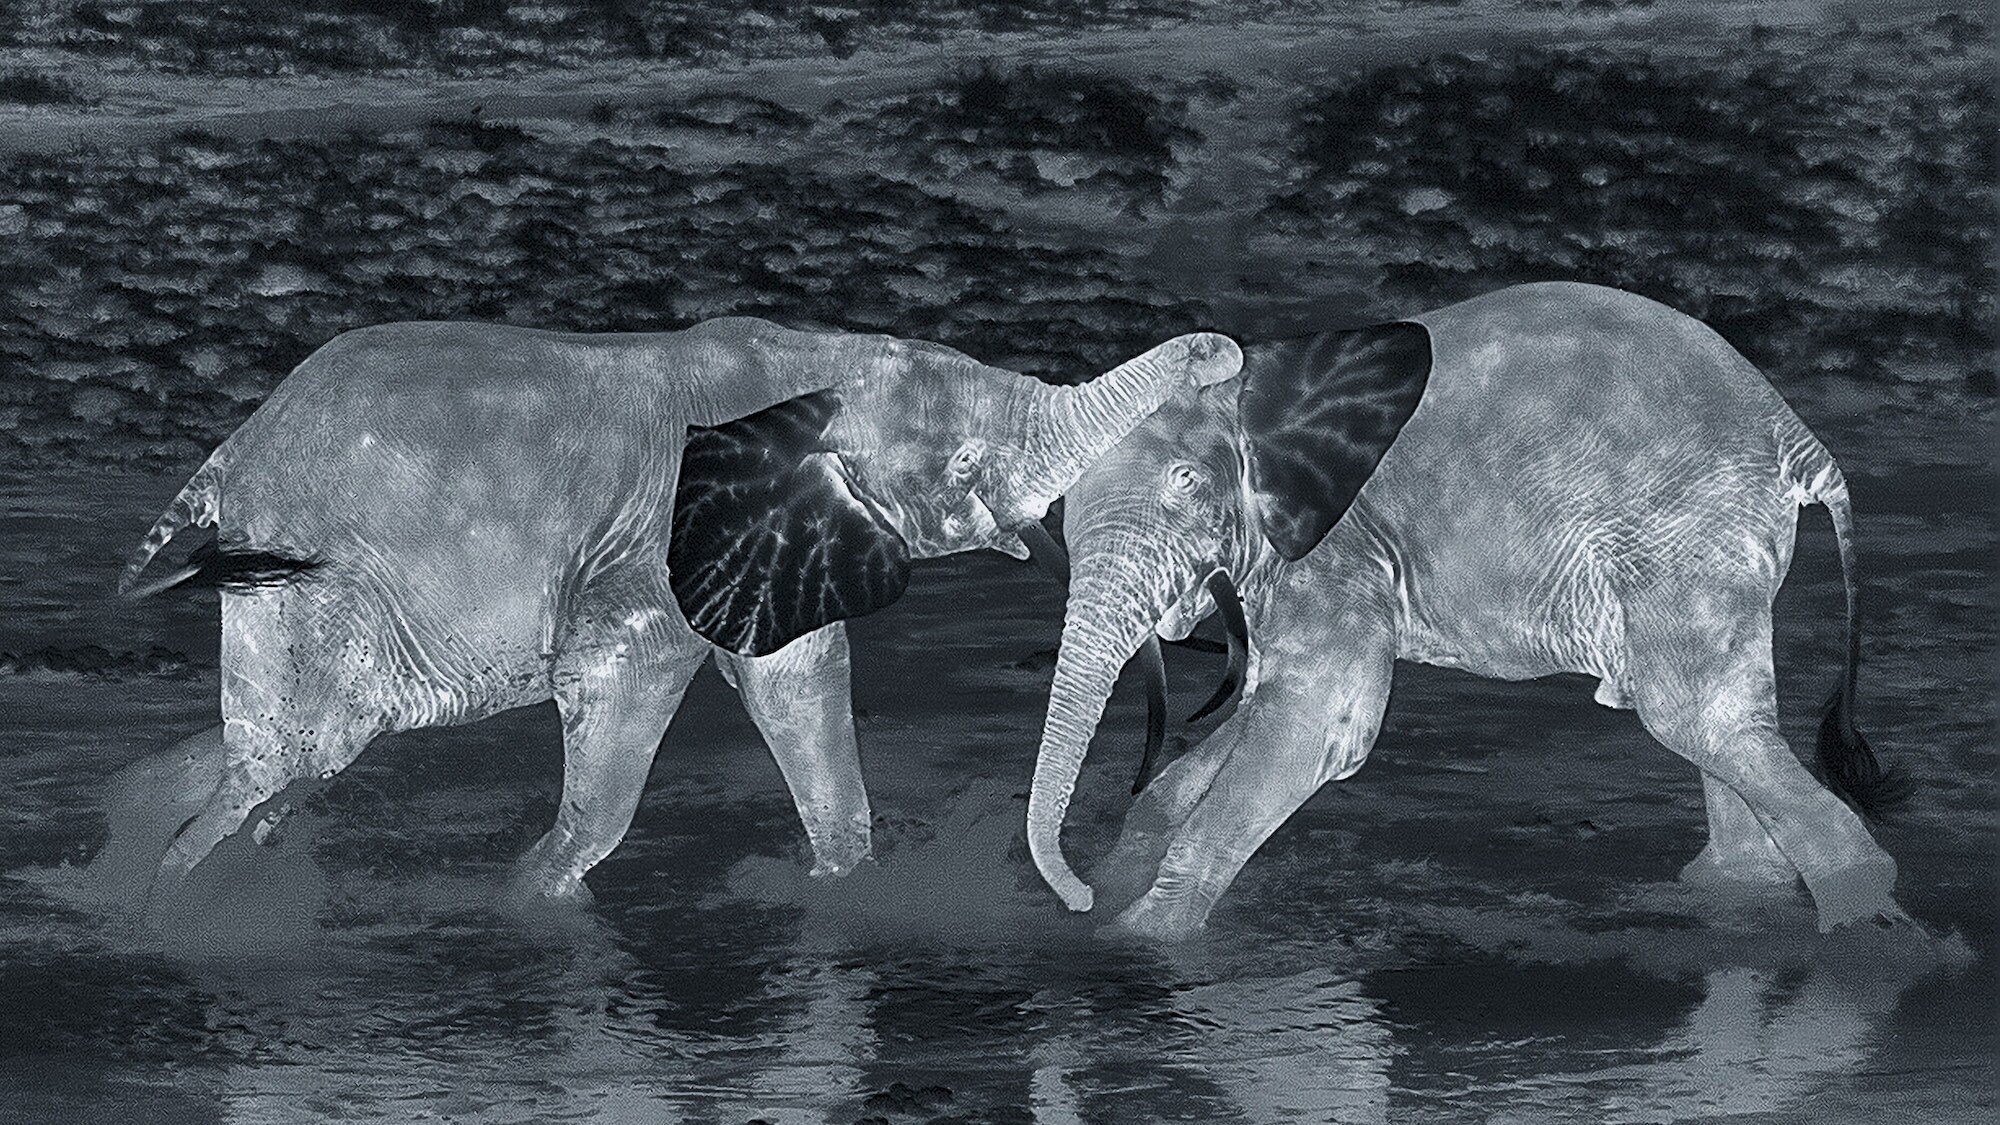 Night-cam image of two elephants in the water. (National Geographic for Disney+/Sam Stewart)